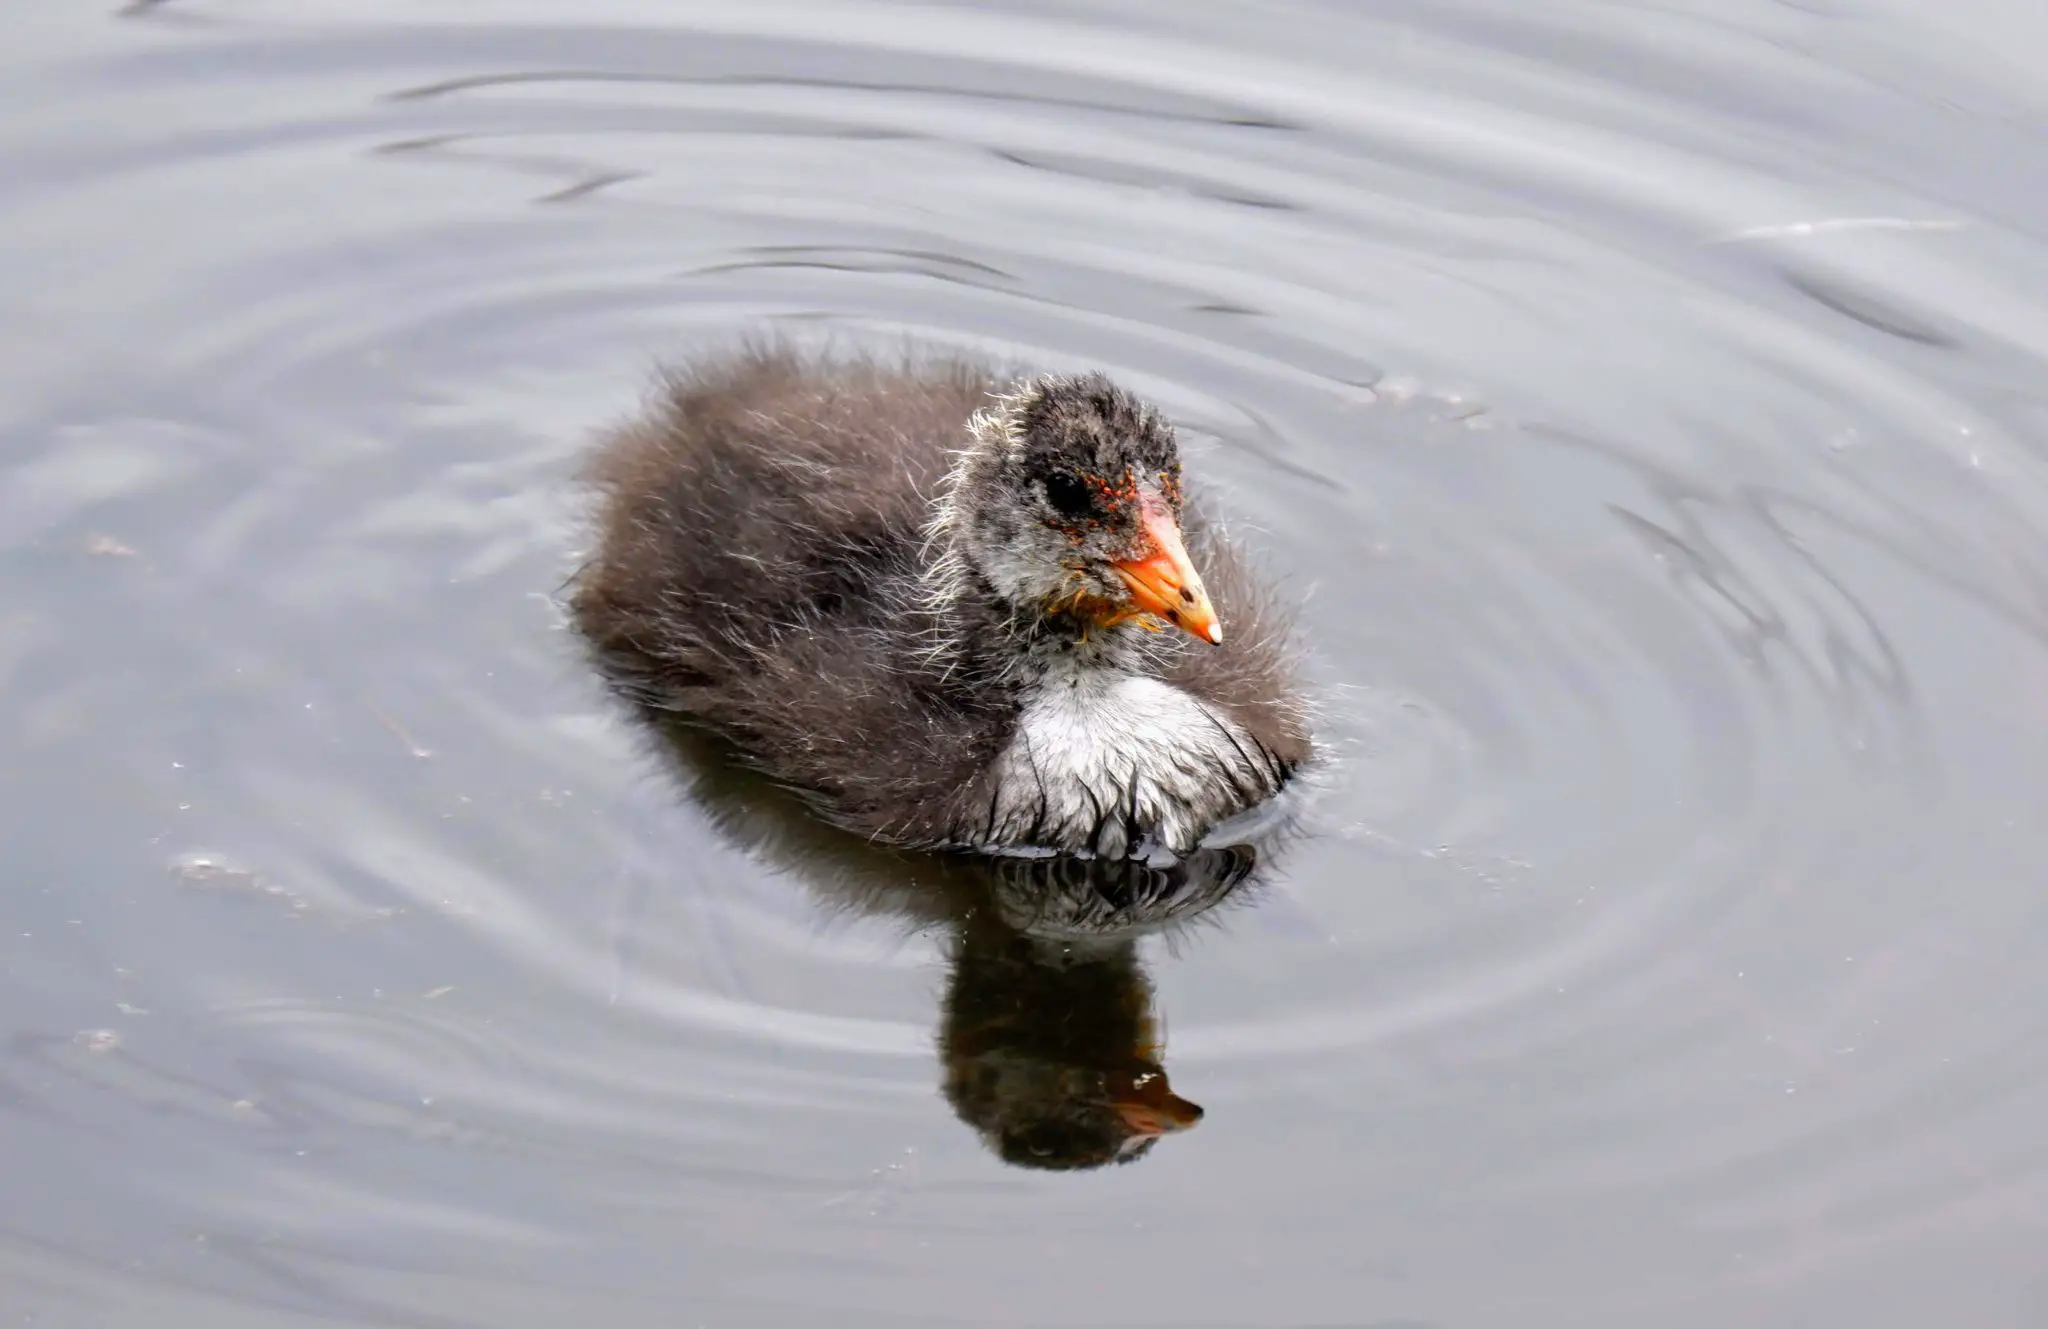 Baby coot, Sale Water Park, Manchester